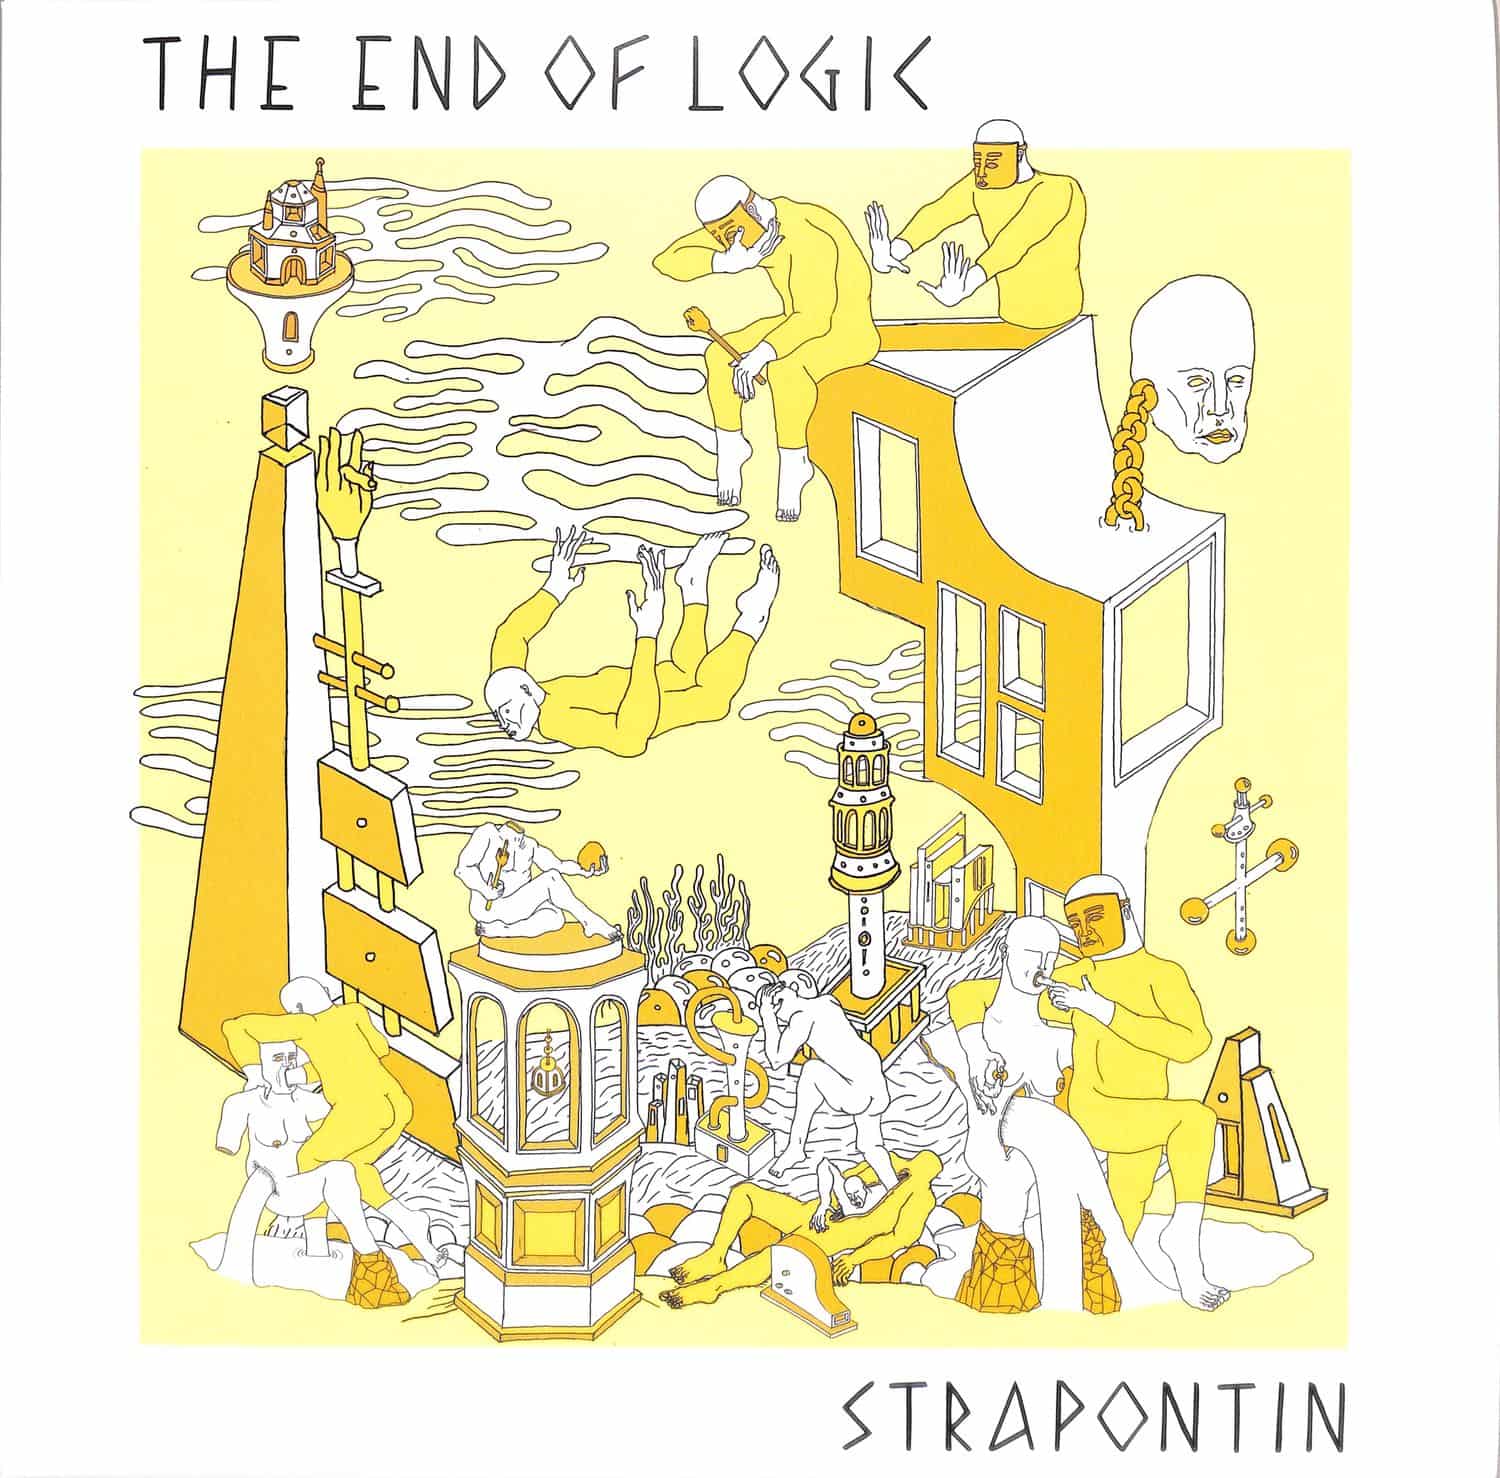 Strapontin - THE END OF LOGIC EP